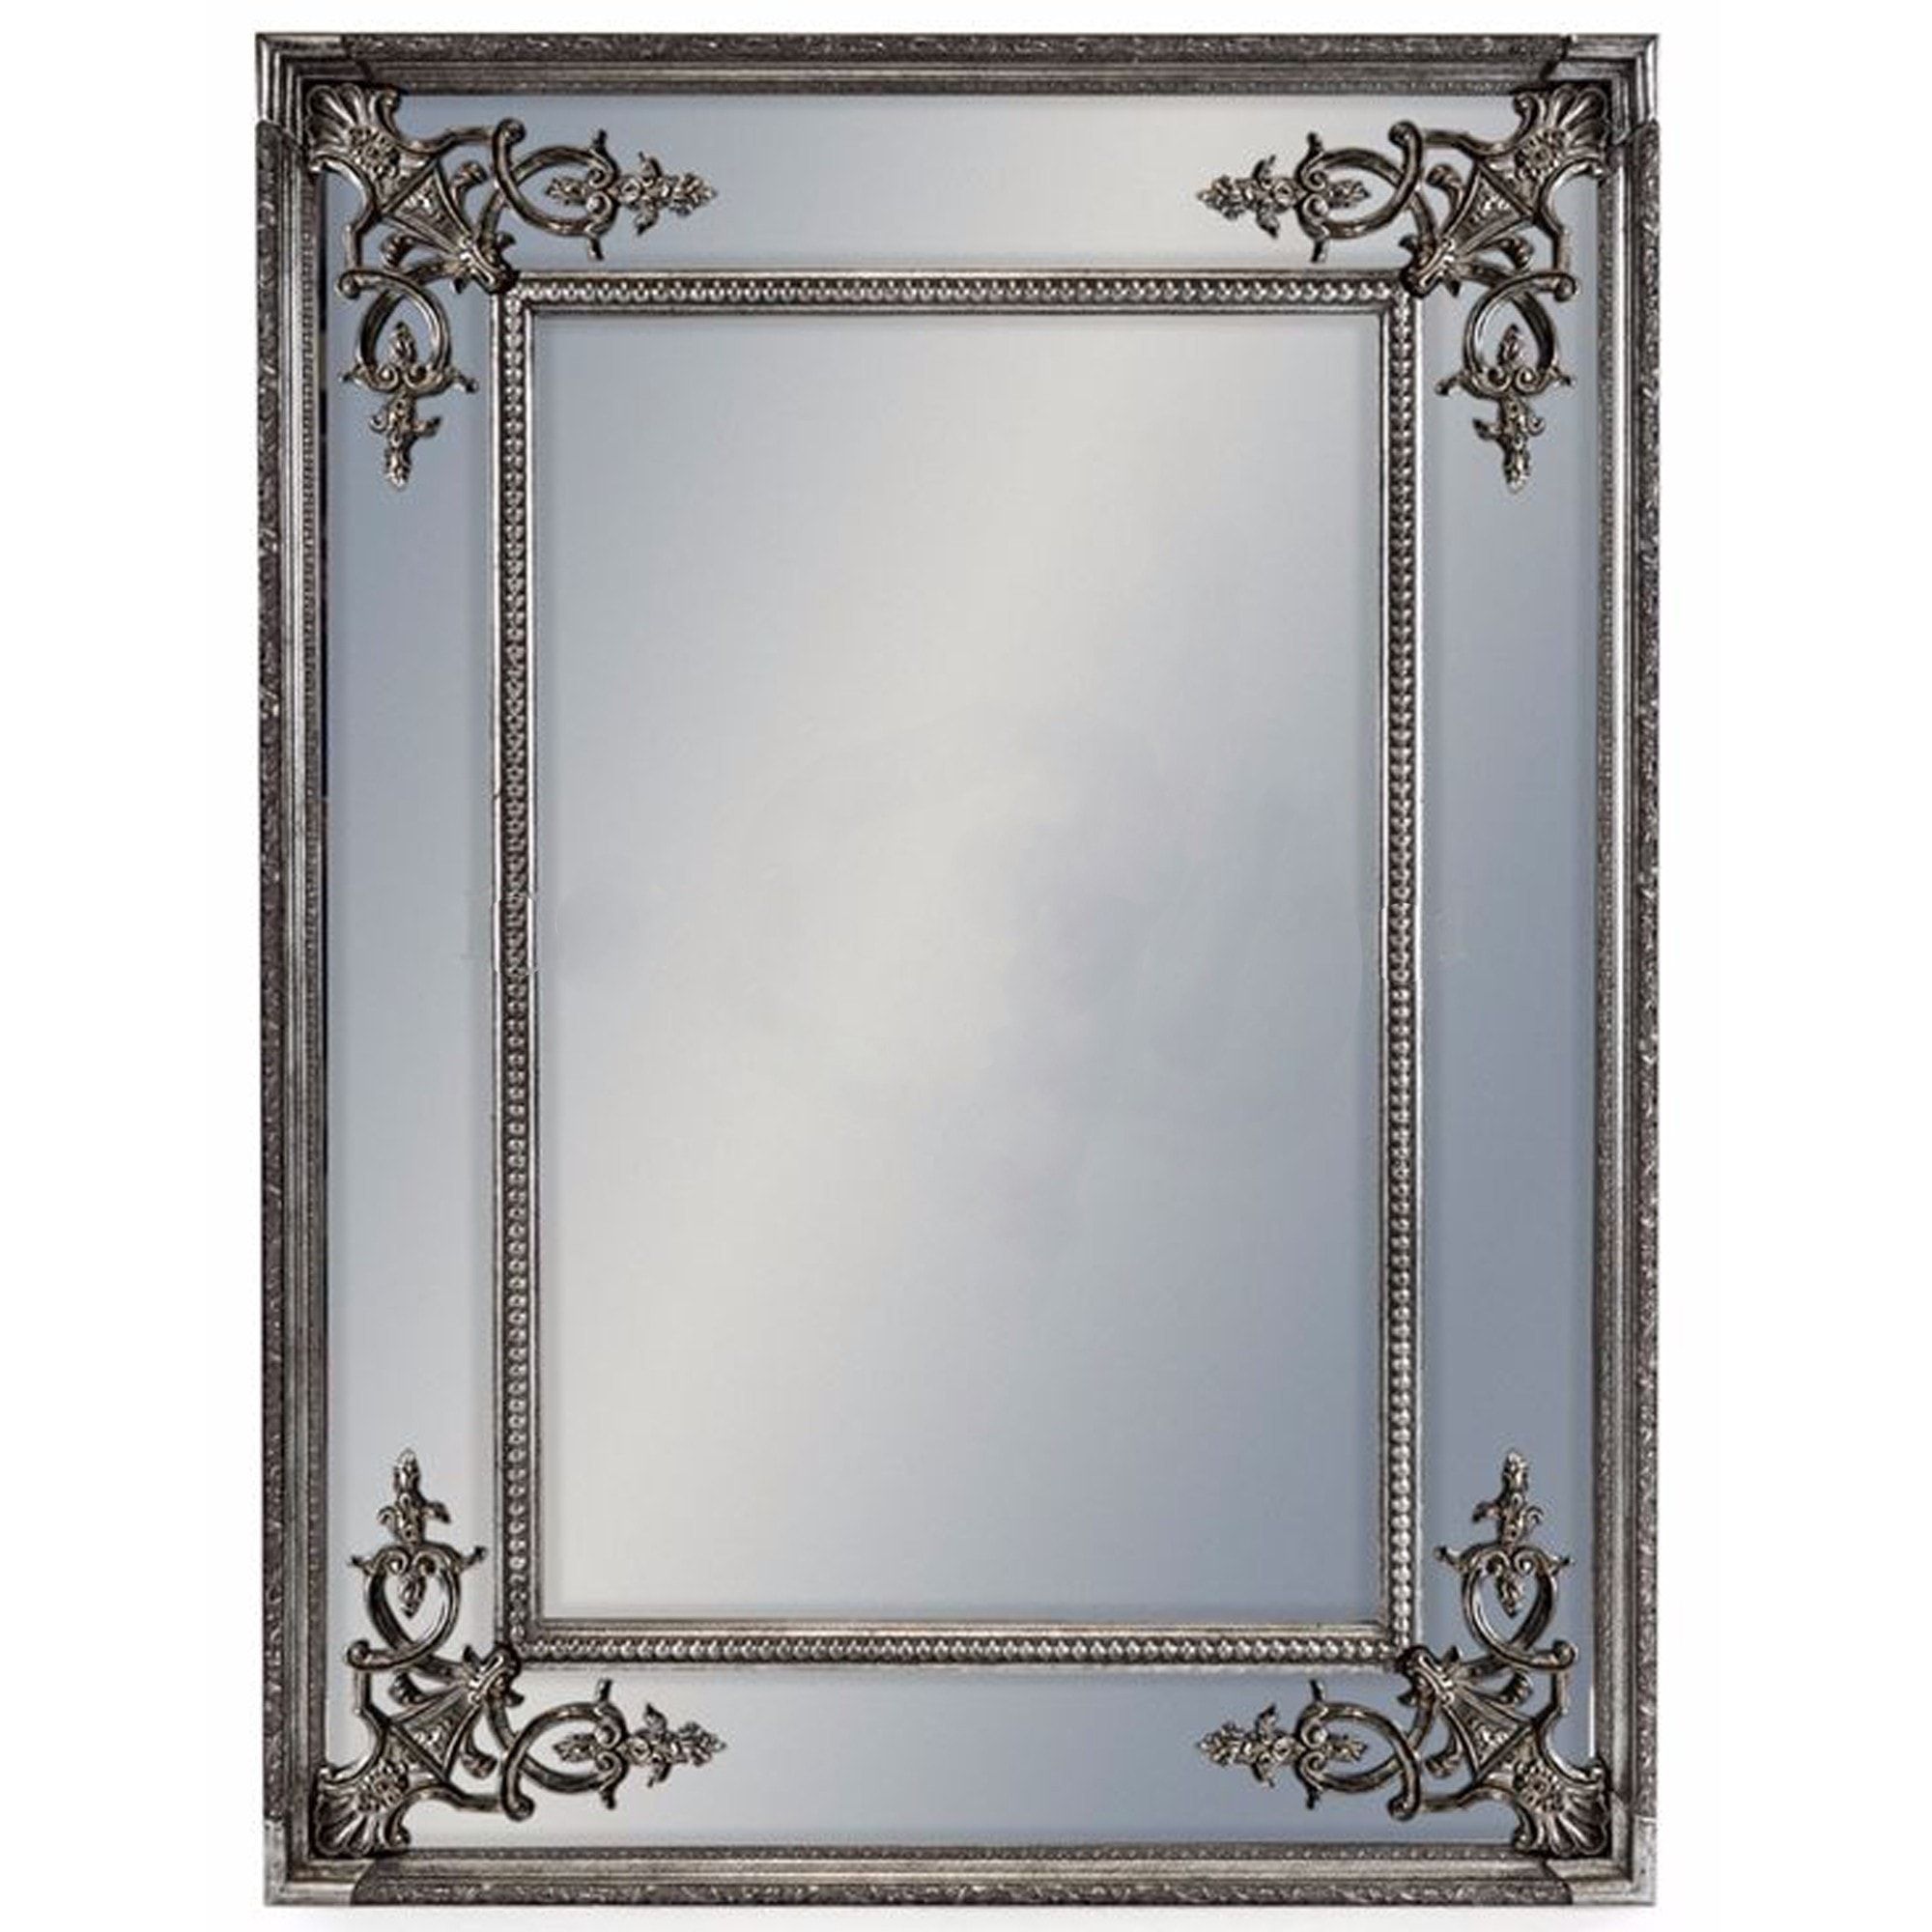 Silver Square French Mirror | Mirrors | Decorative Mirrors With Regard To Silver Beaded Square Wall Mirrors (View 15 of 15)